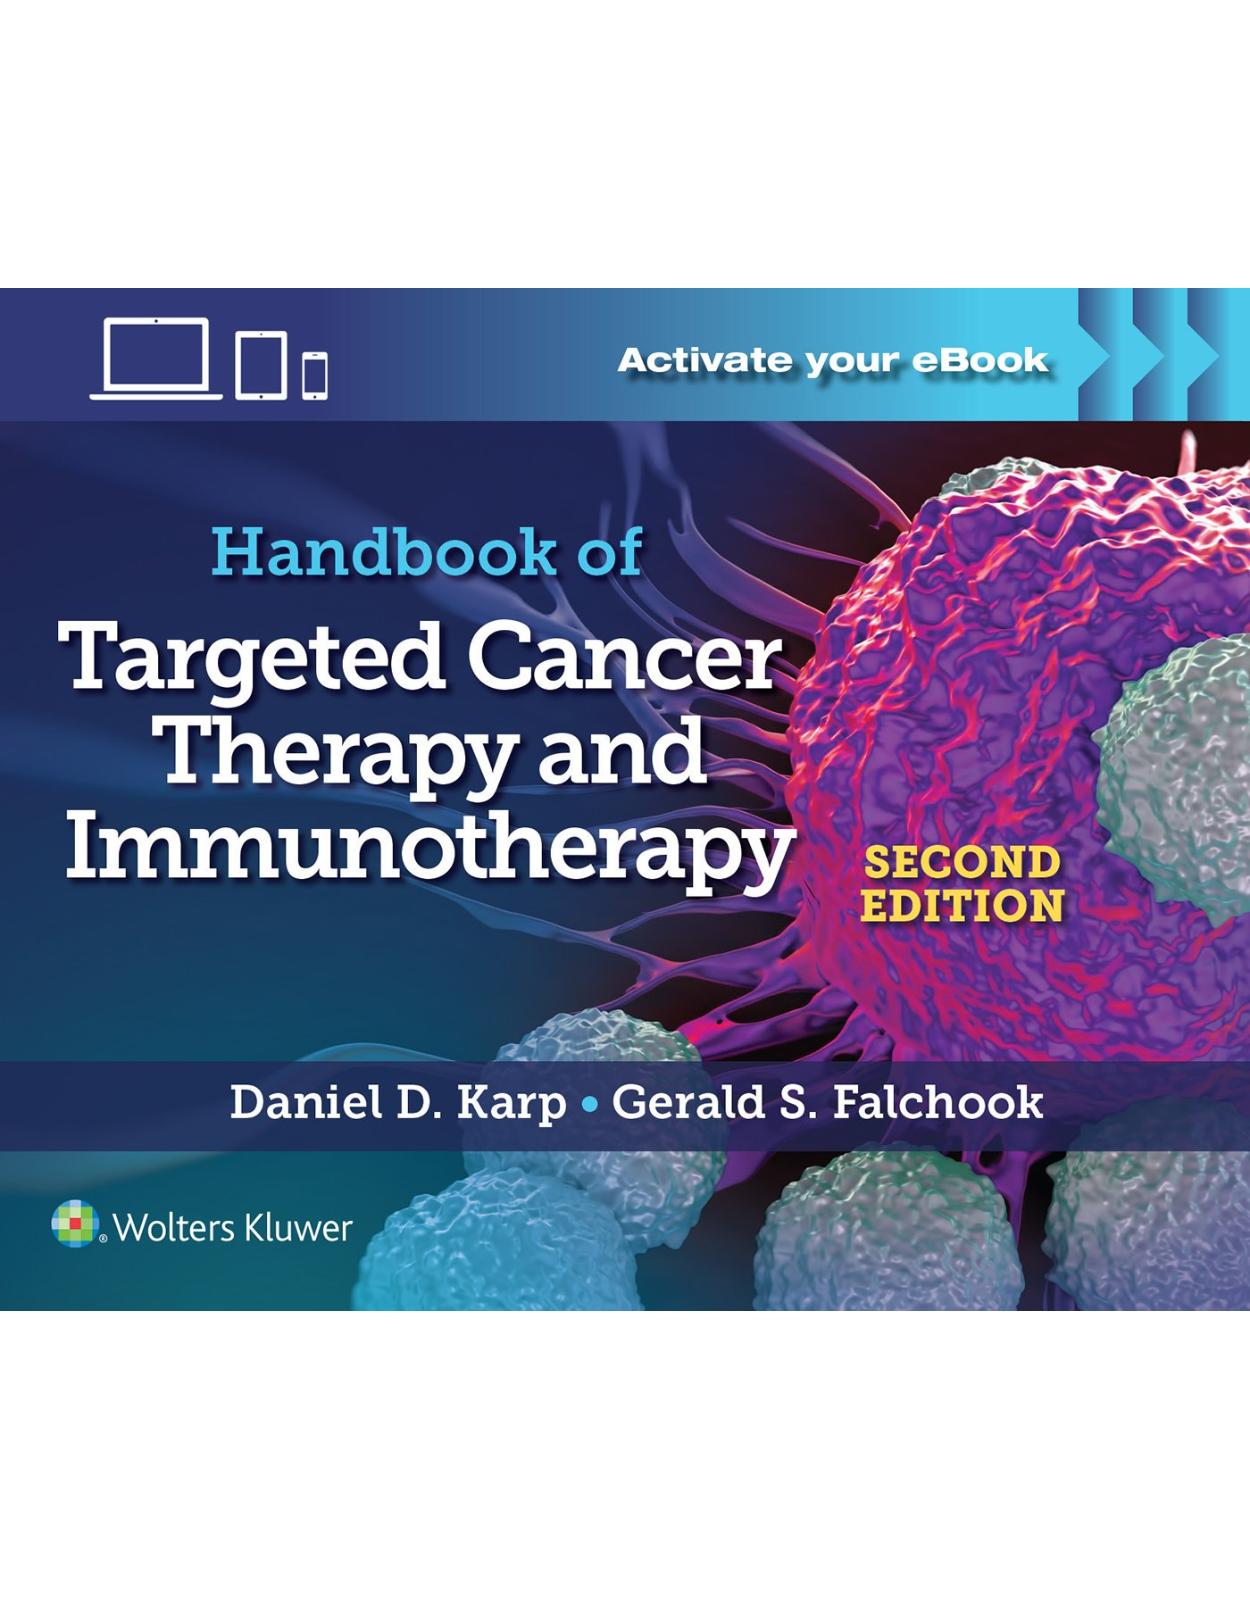 Handbook of Targeted Cancer Therapy and Immunotherapy, Second edition